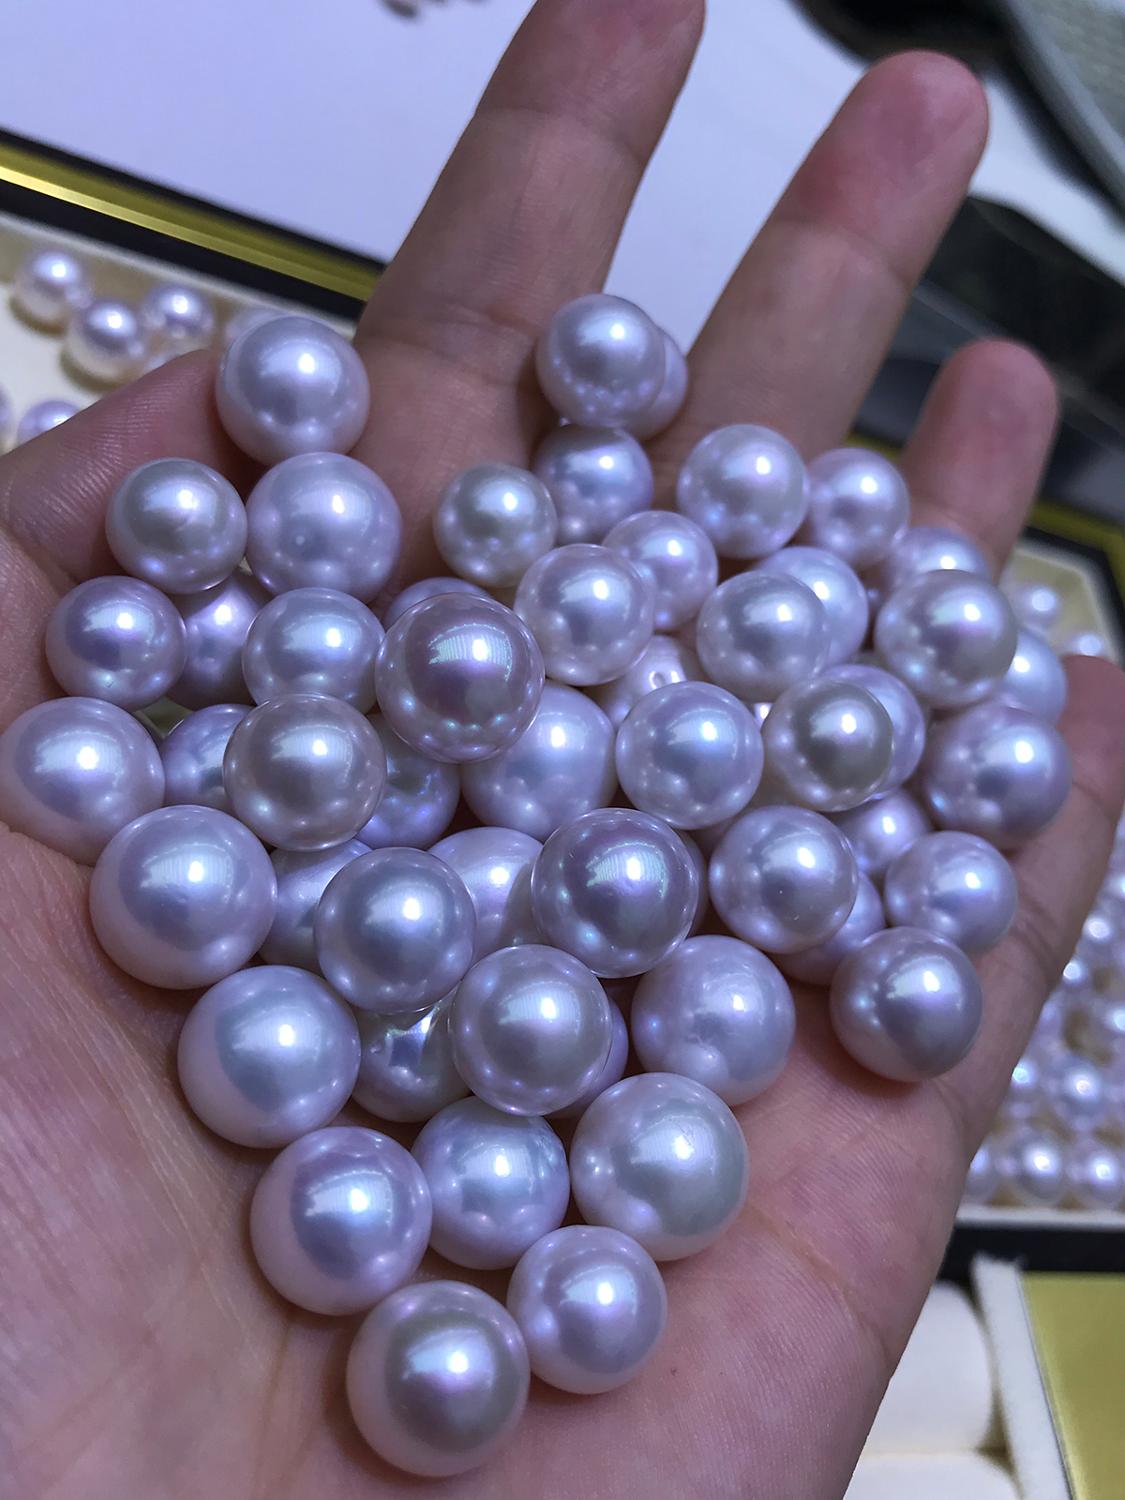 free shipping, high quaility 1 pc,10-14 mm AAA perfect round,100% Nature freshwater loose pearl,half hole drilled